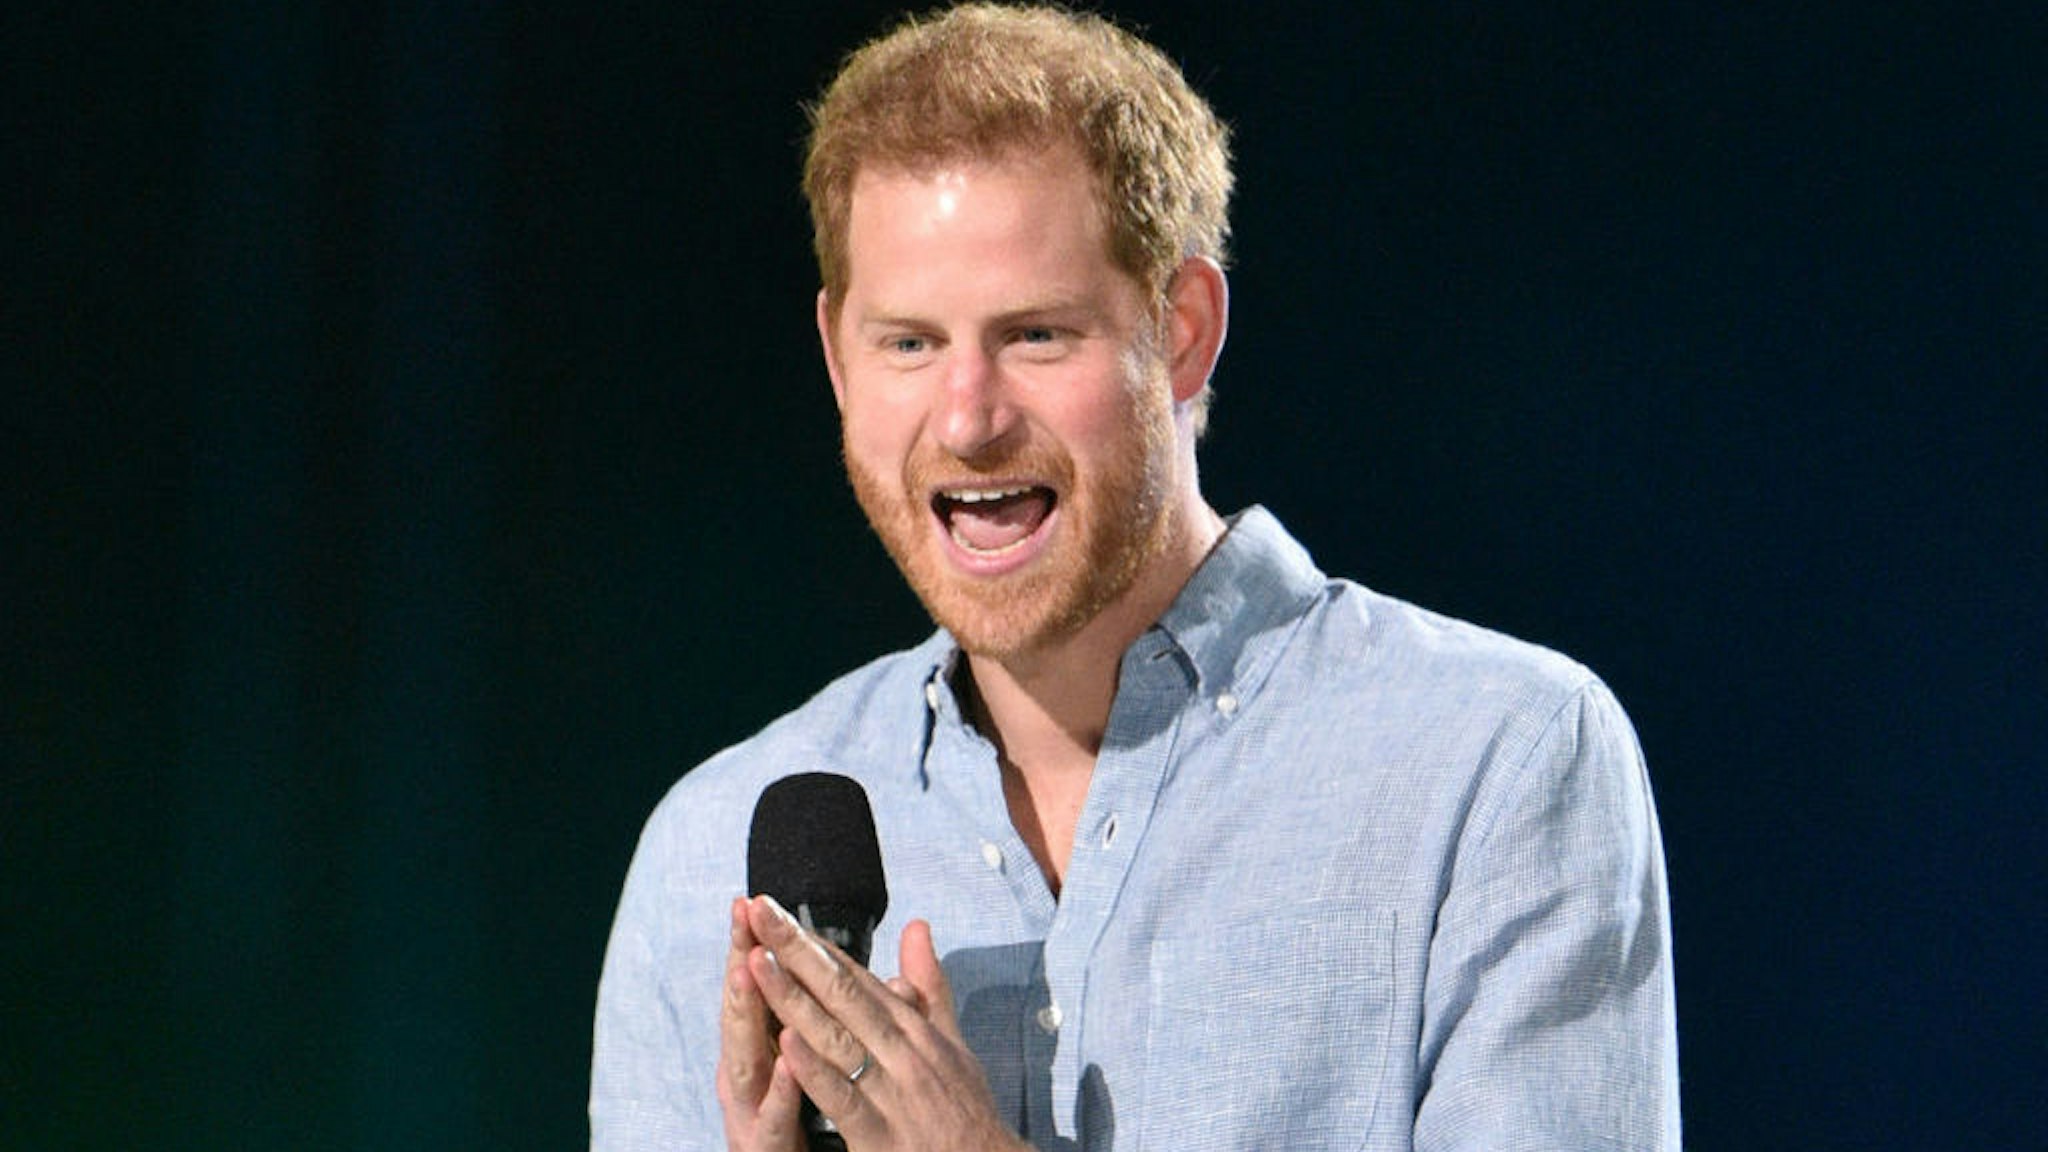 Co-Chair Britain's Prince Harry, Duke of Sussex, speaks onstage during the taping of the "Vax Live" fundraising concert at SoFi Stadium in Inglewood, California, on May 2, 2021. - The fundraising concert "Vax Live: The Concert To Reunite The World", put on by international advocacy organization Global Citizen, is pushing businesses to "donate dollars for doses," and for G7 governments to share excess vaccines. The concert will be pre-taped on May 2 in Los Angeles, and will stream on YouTube along with American television networks ABC and CBS on May 8. (Photo by VALERIE MACON / AFP) (Photo by VALERIE MACON/AFP via Getty Images)